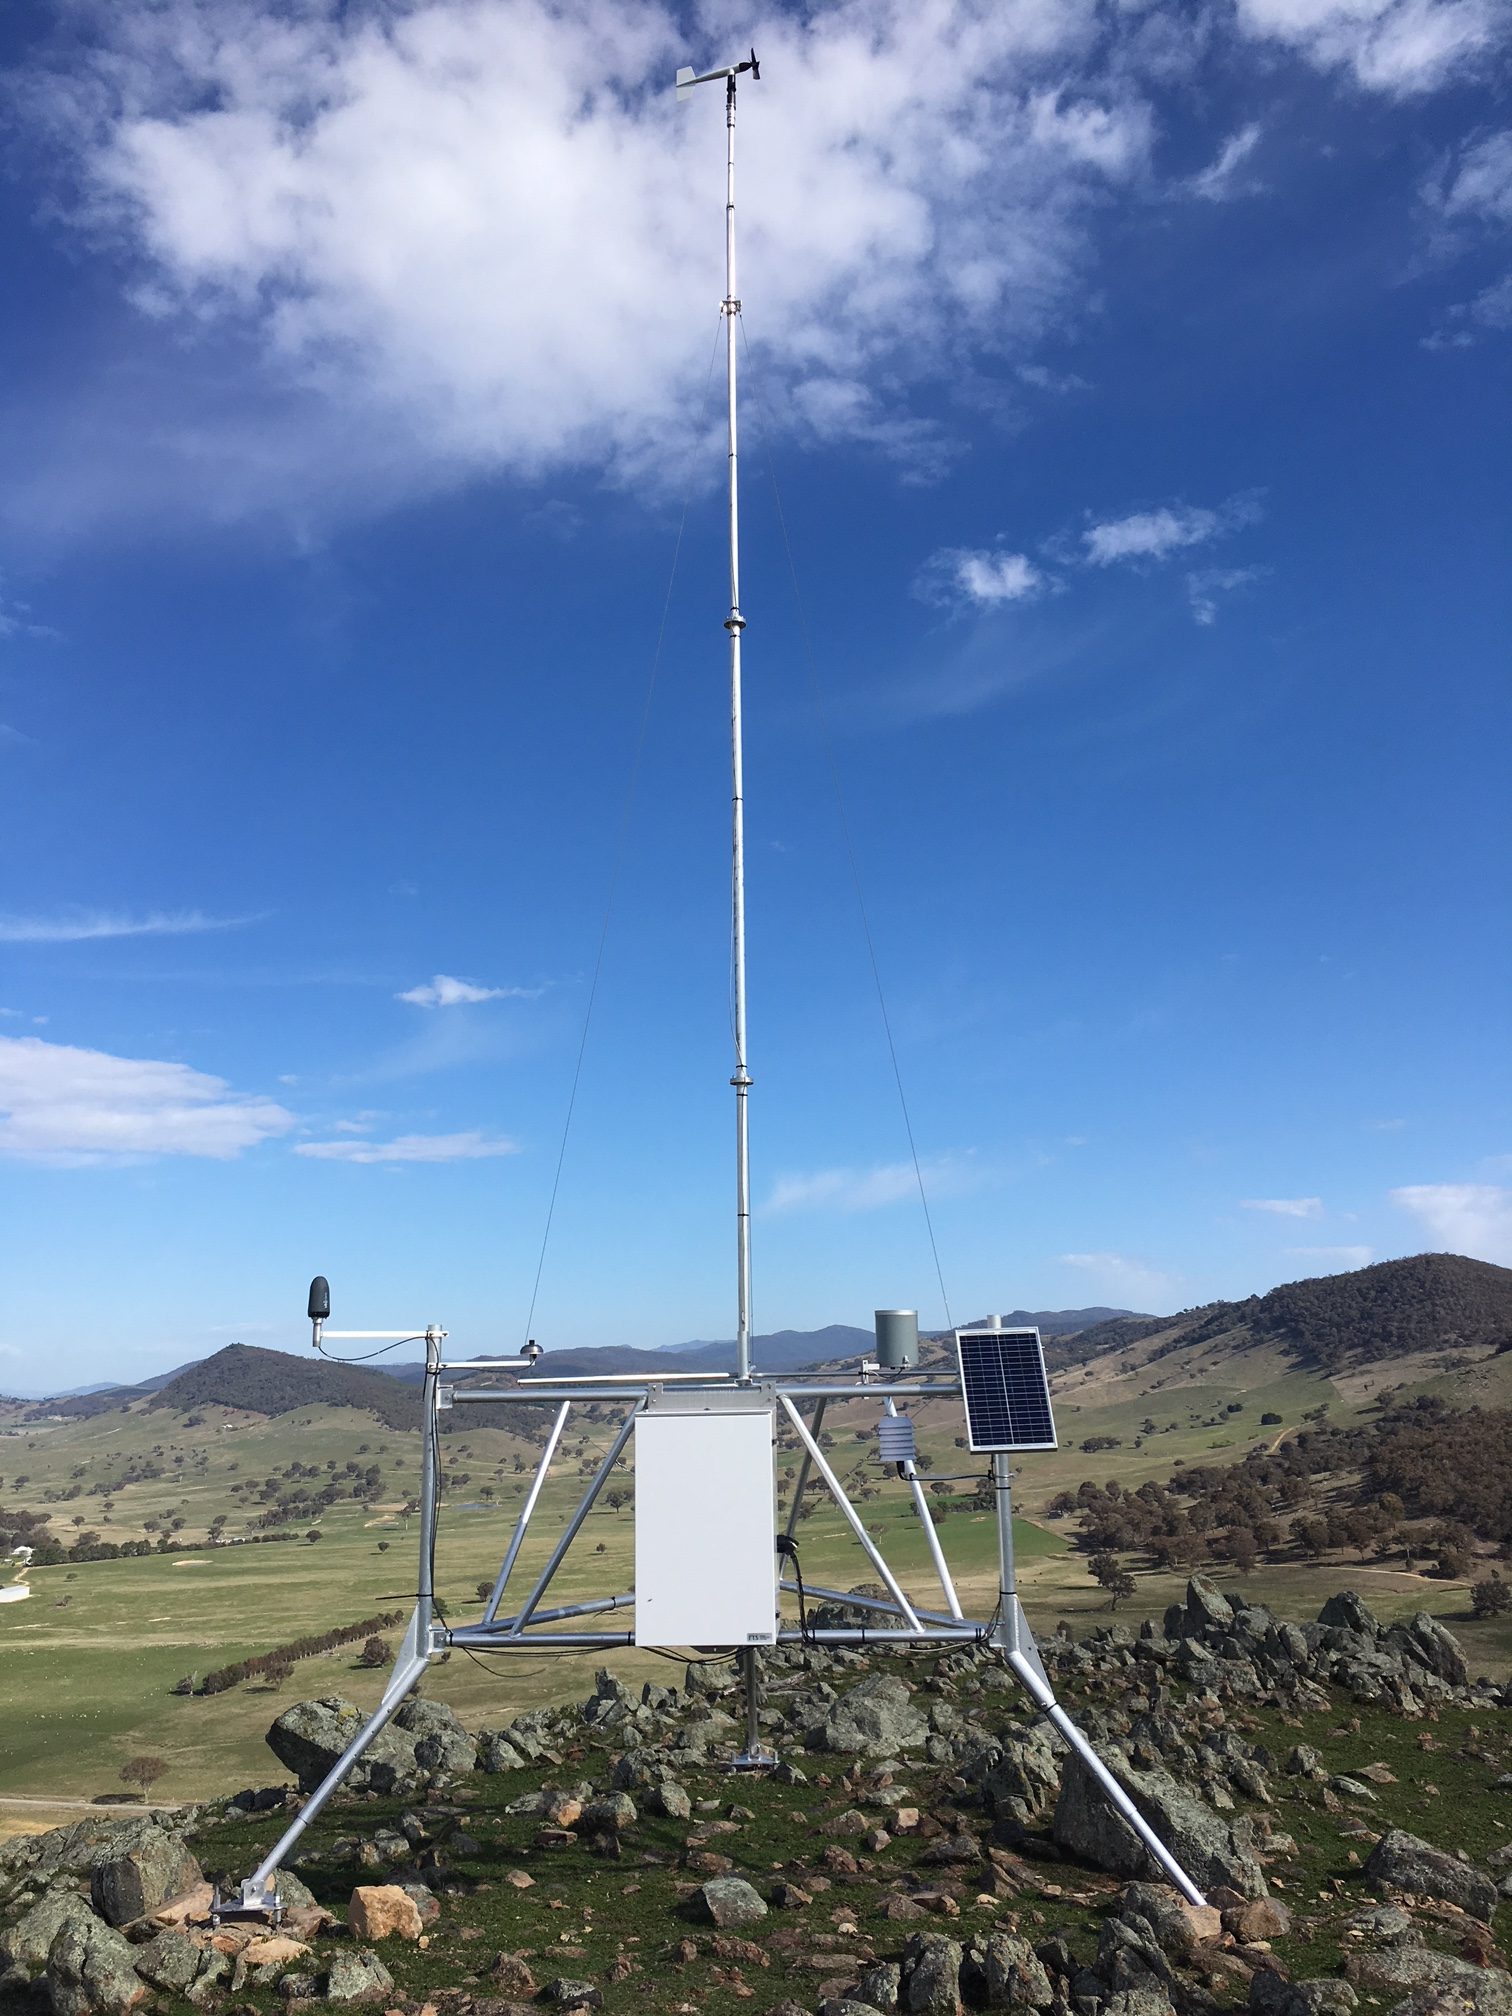 Fixed site RAWS (Remote Automated Weather Station)